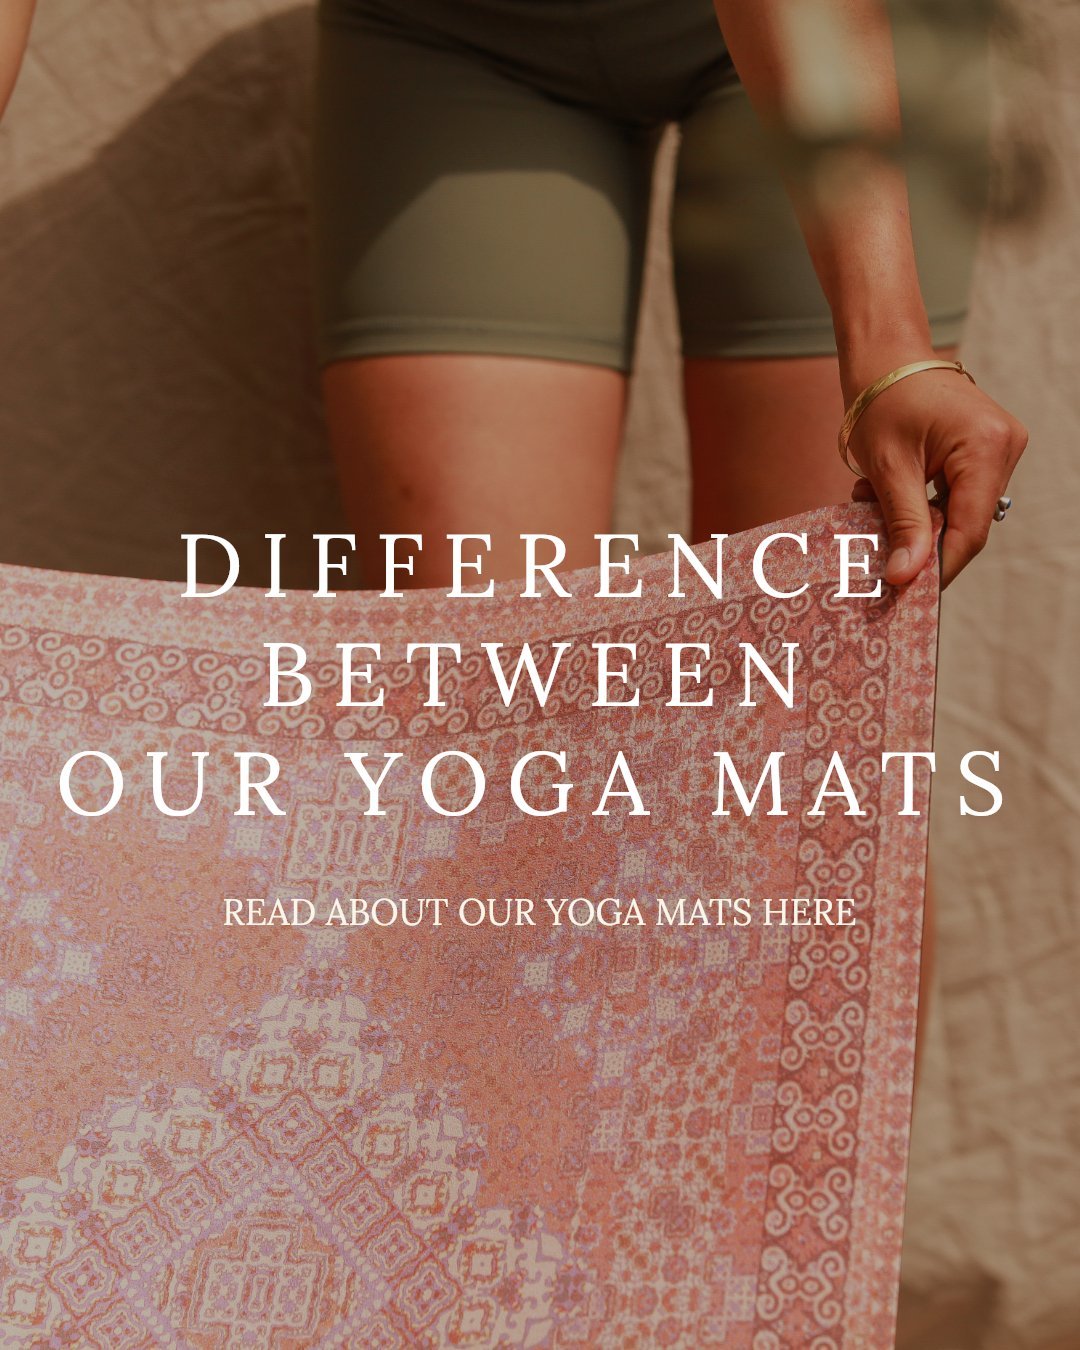 THE DIFFERENCES BETWEEN OUR YOGA MATS - Yogi Peace Club